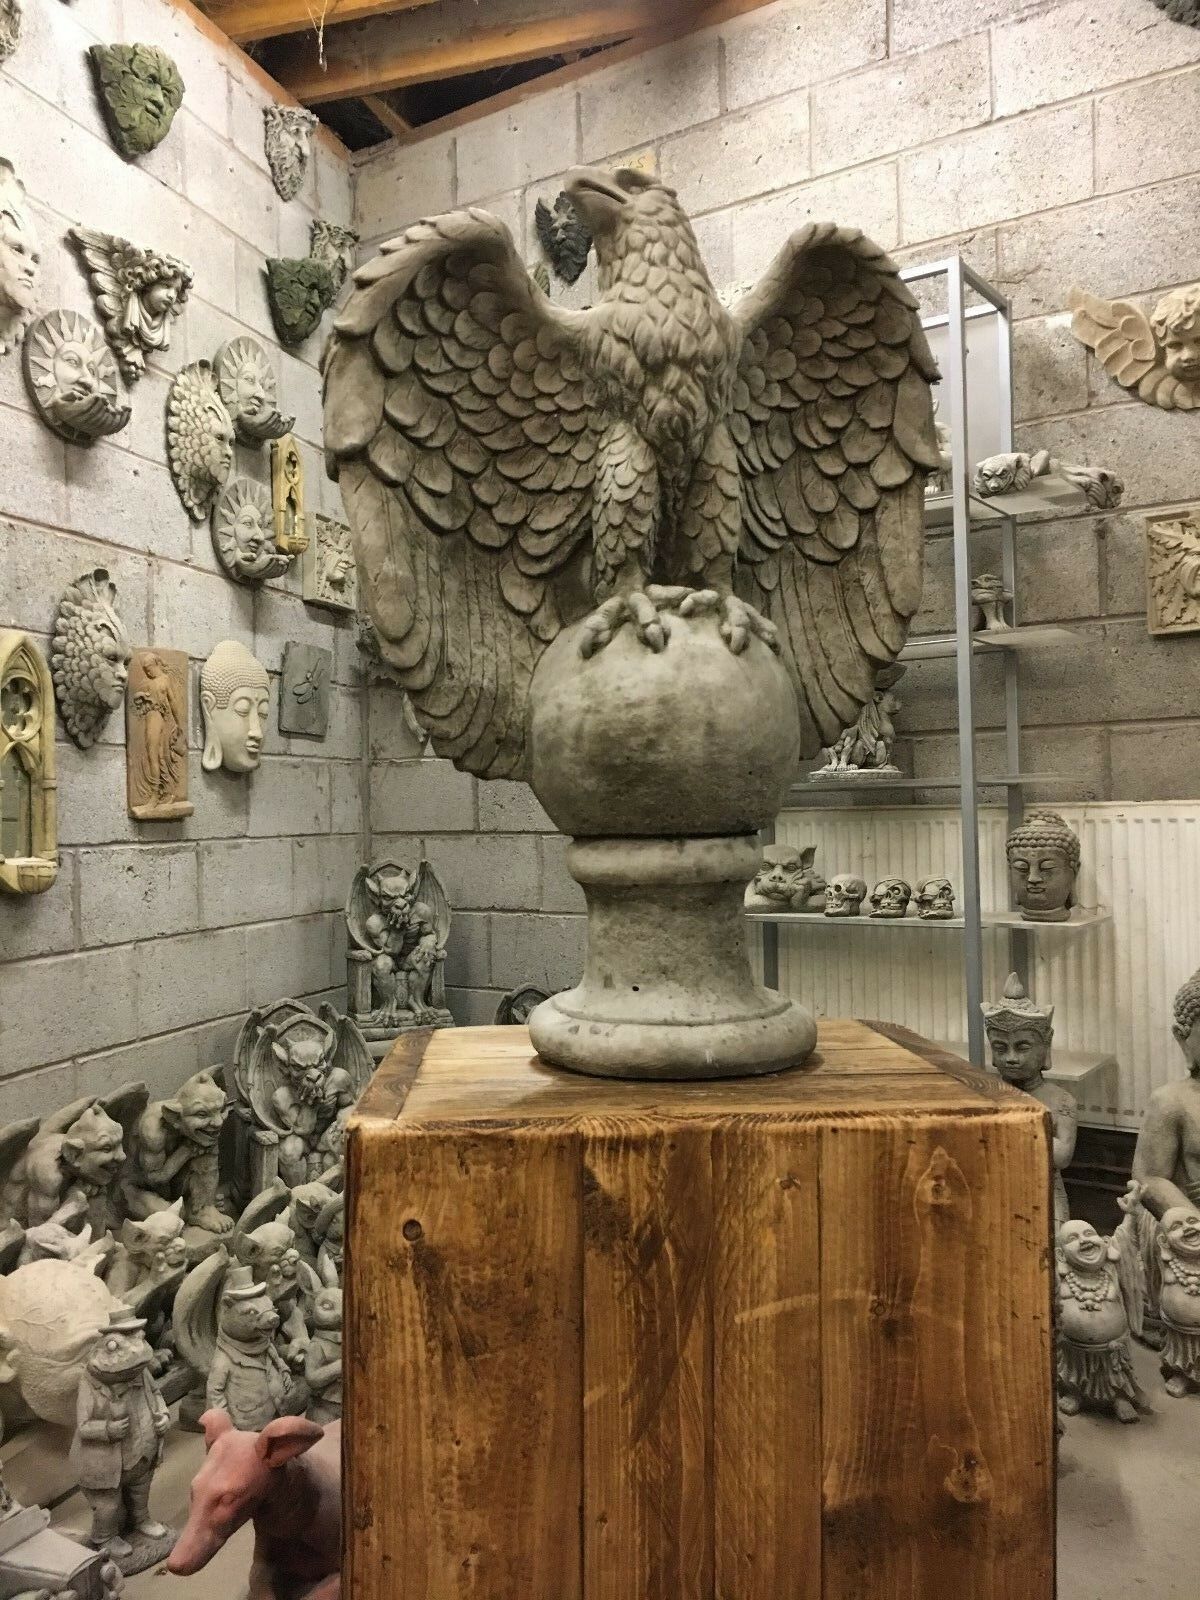 Large Stone Winged Eagle on Ball Statue